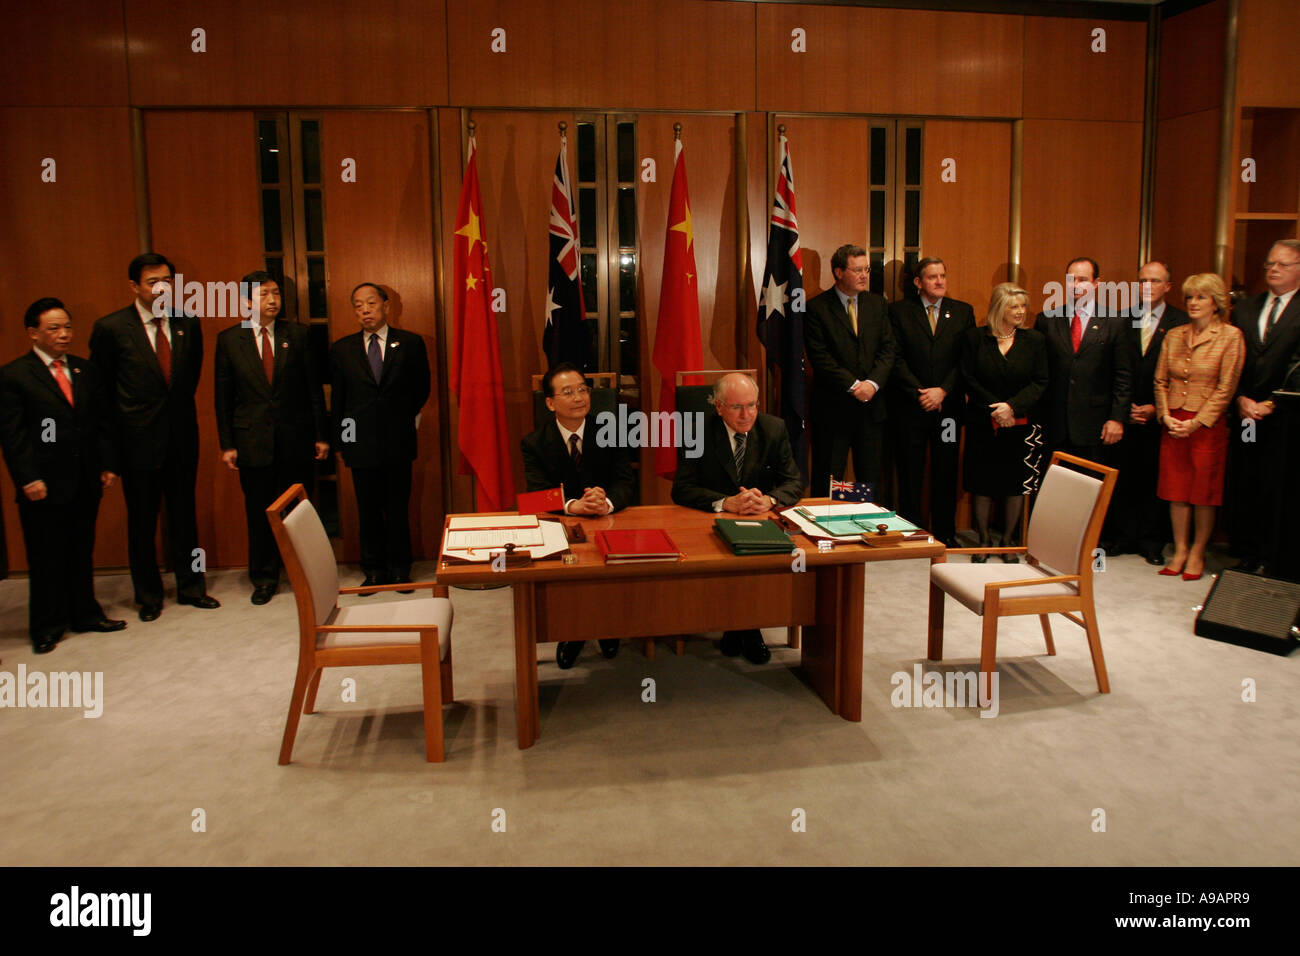 Premiere Chen Jiabao left and Prime Minister John Howard right during a uranium trade agreement signing Canberra 2006 Stock Photo